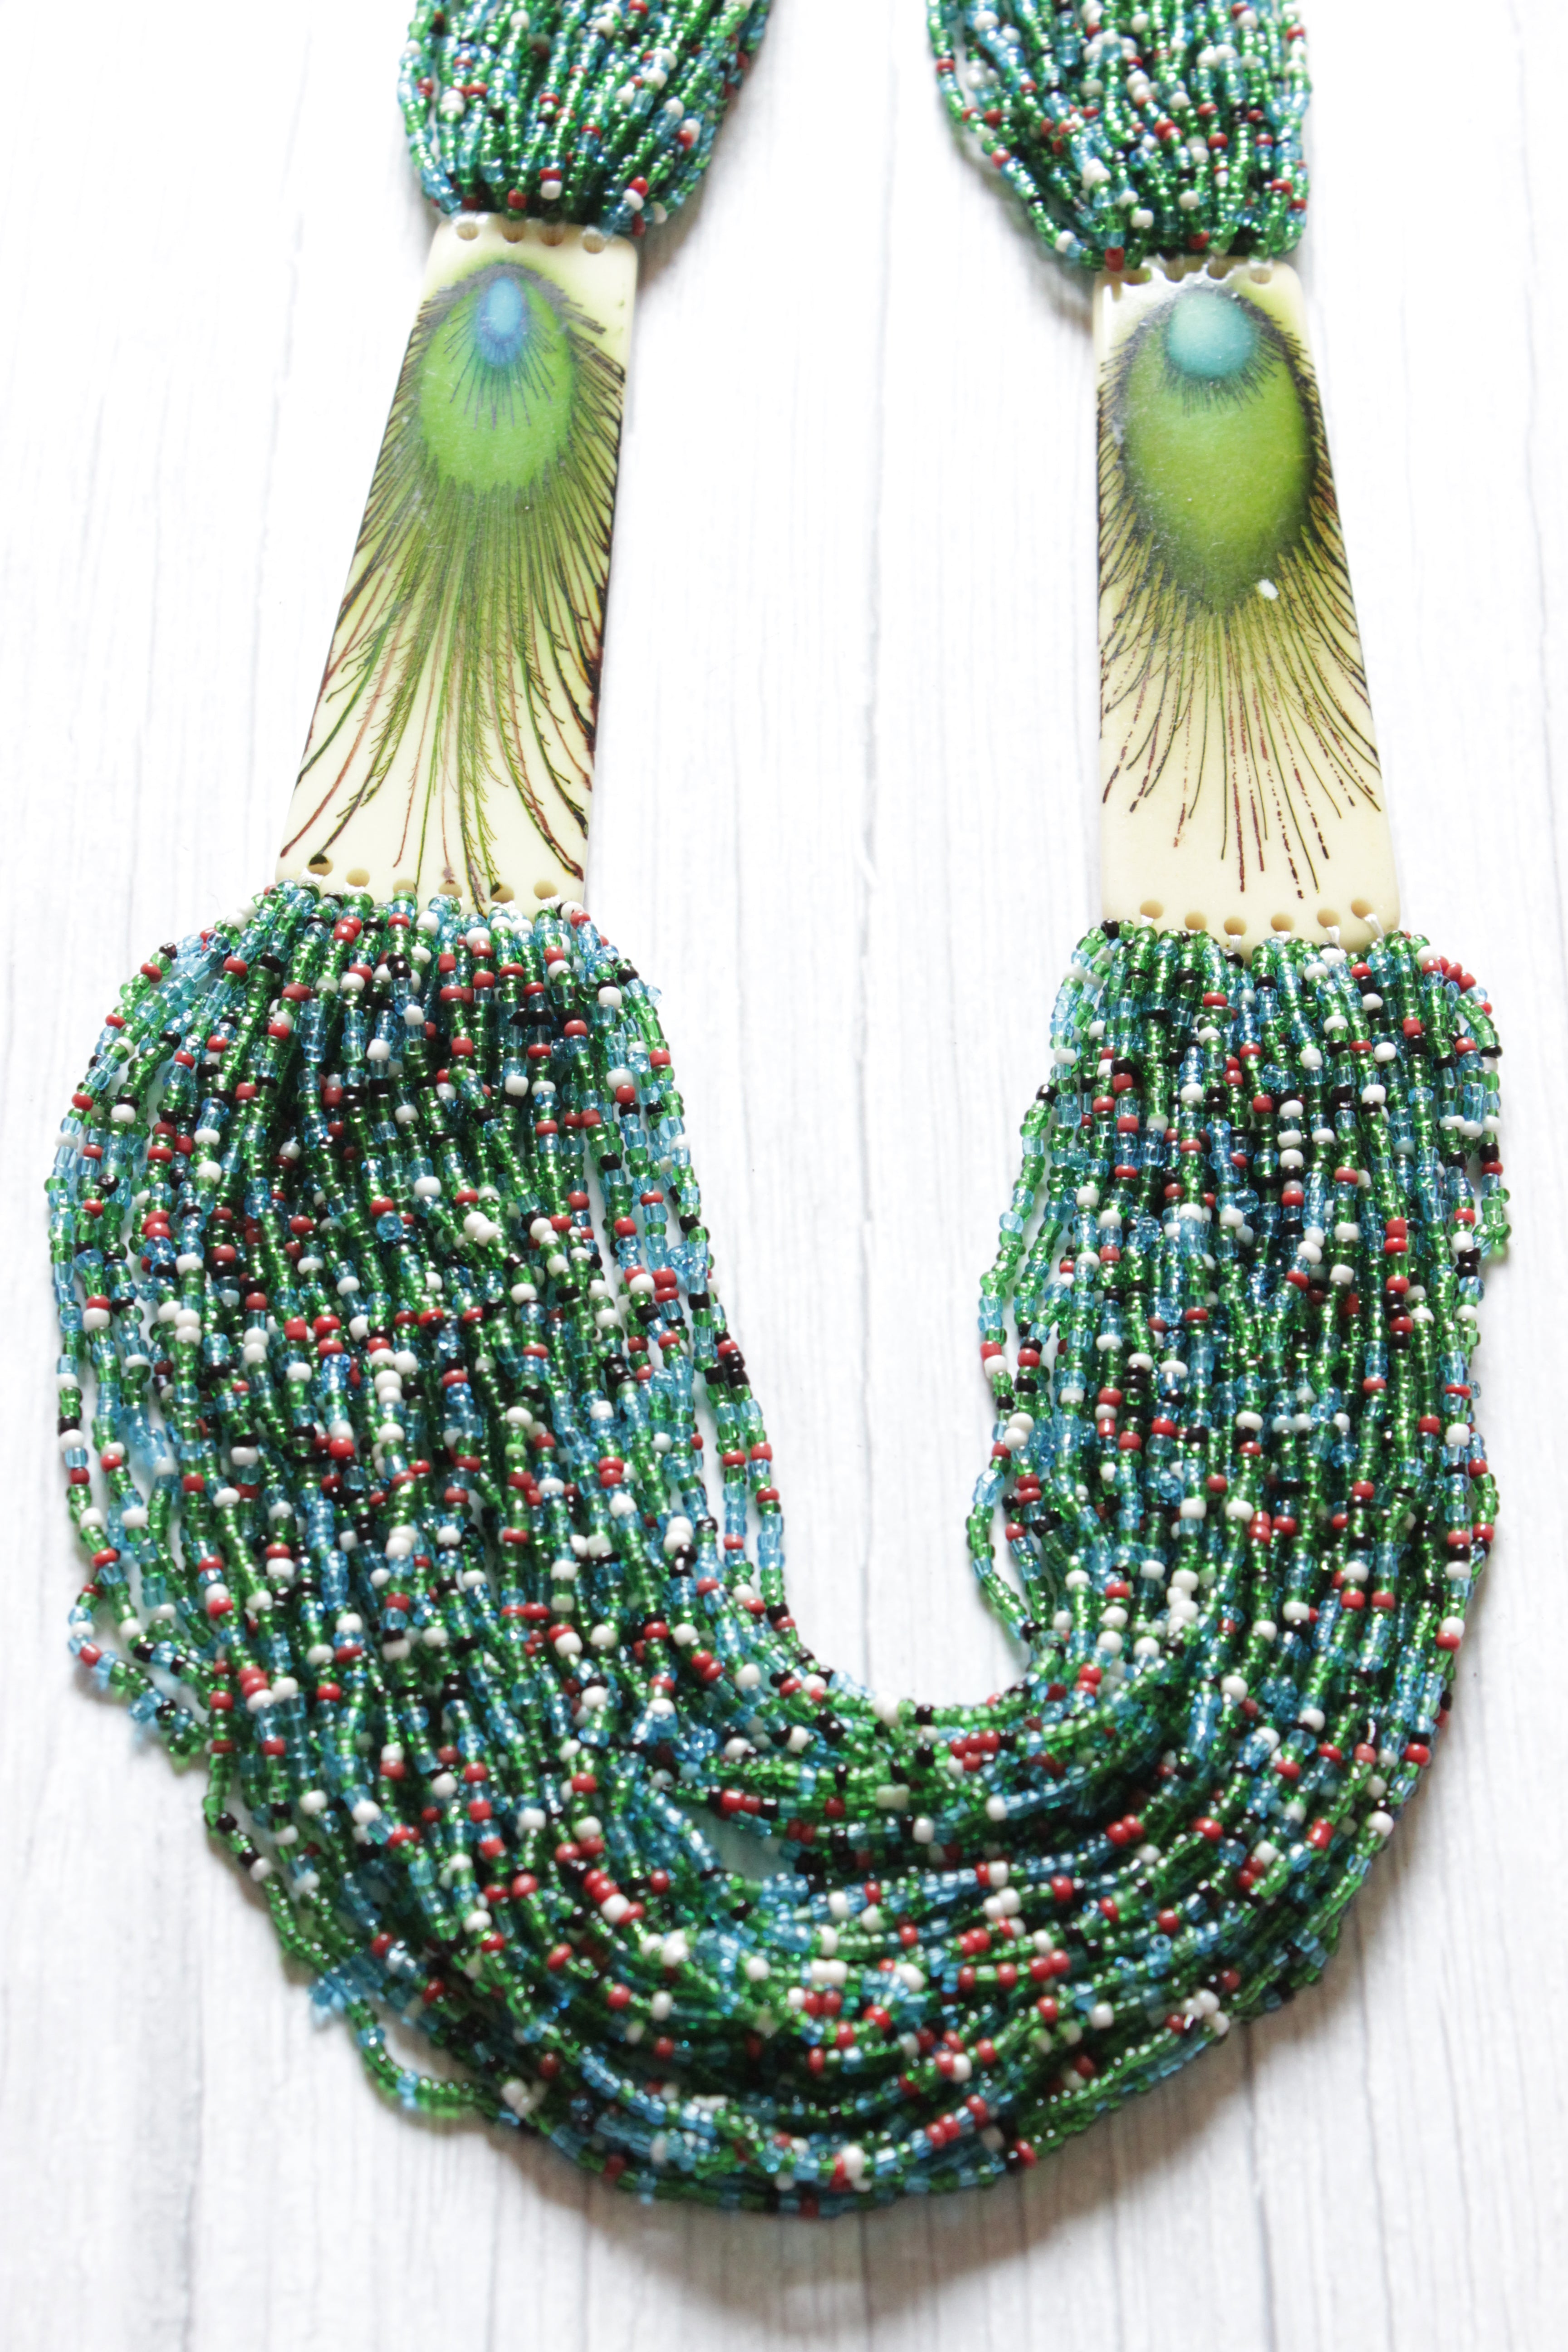 Peacock Colors and Motif Hand Braided Beads Necklace